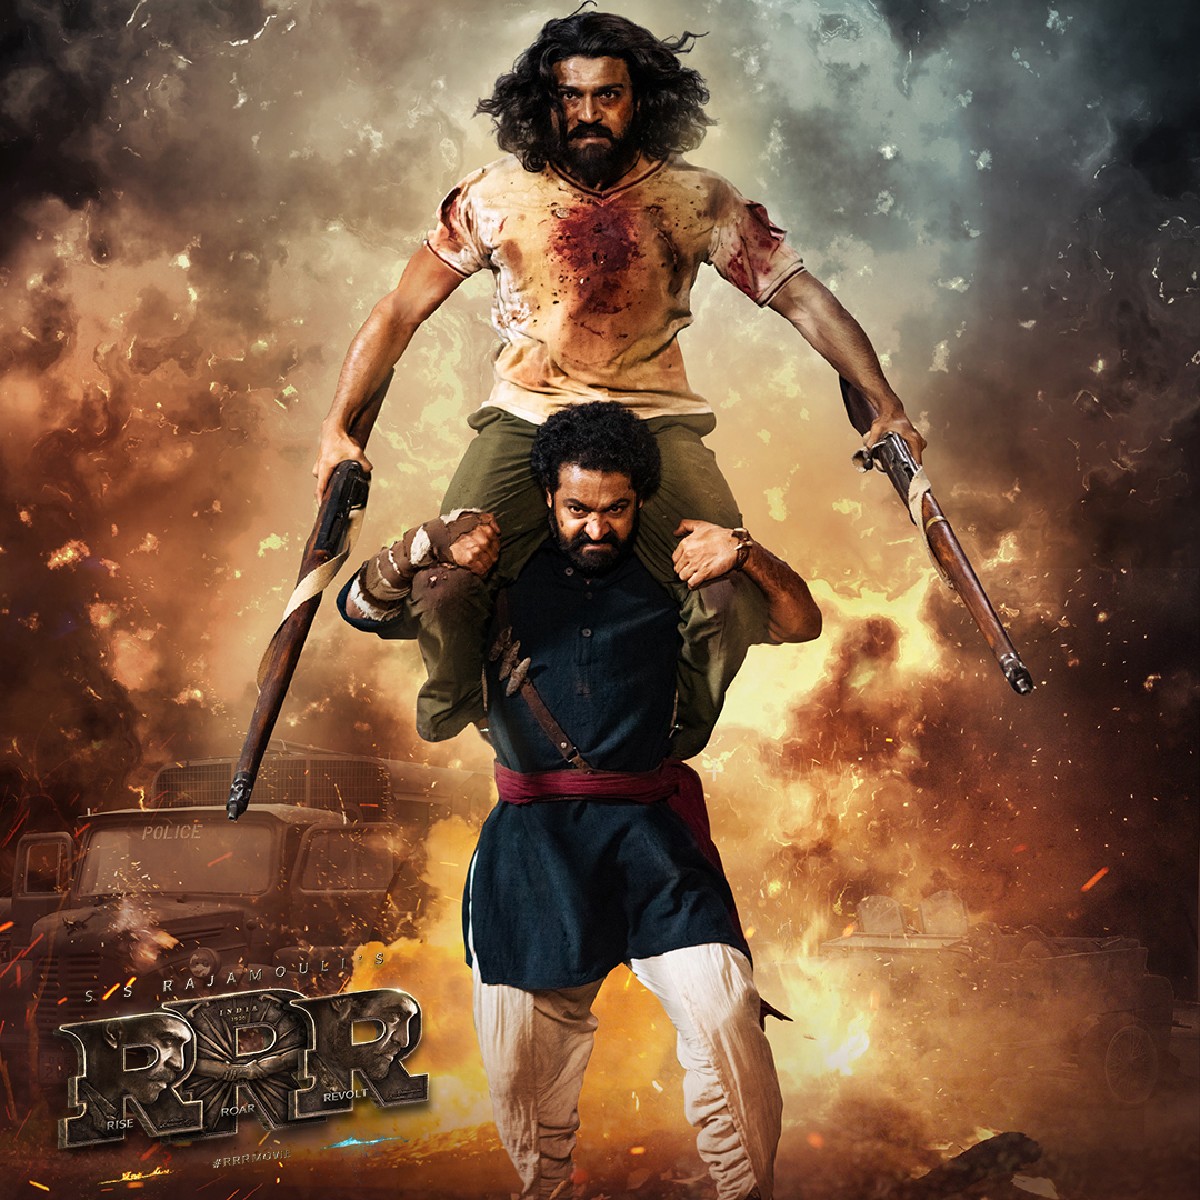 Presented in Dolby Atmos for the first time in Los Angeles! See the exhilarating, action-packed, spectacular mythologizing of two real-life freedom fighters, #RRR, on the big screen for a limited #encoRRRe this Friday at the #TheLandmarkWestwood! Tix: fal.cn/3pNAd